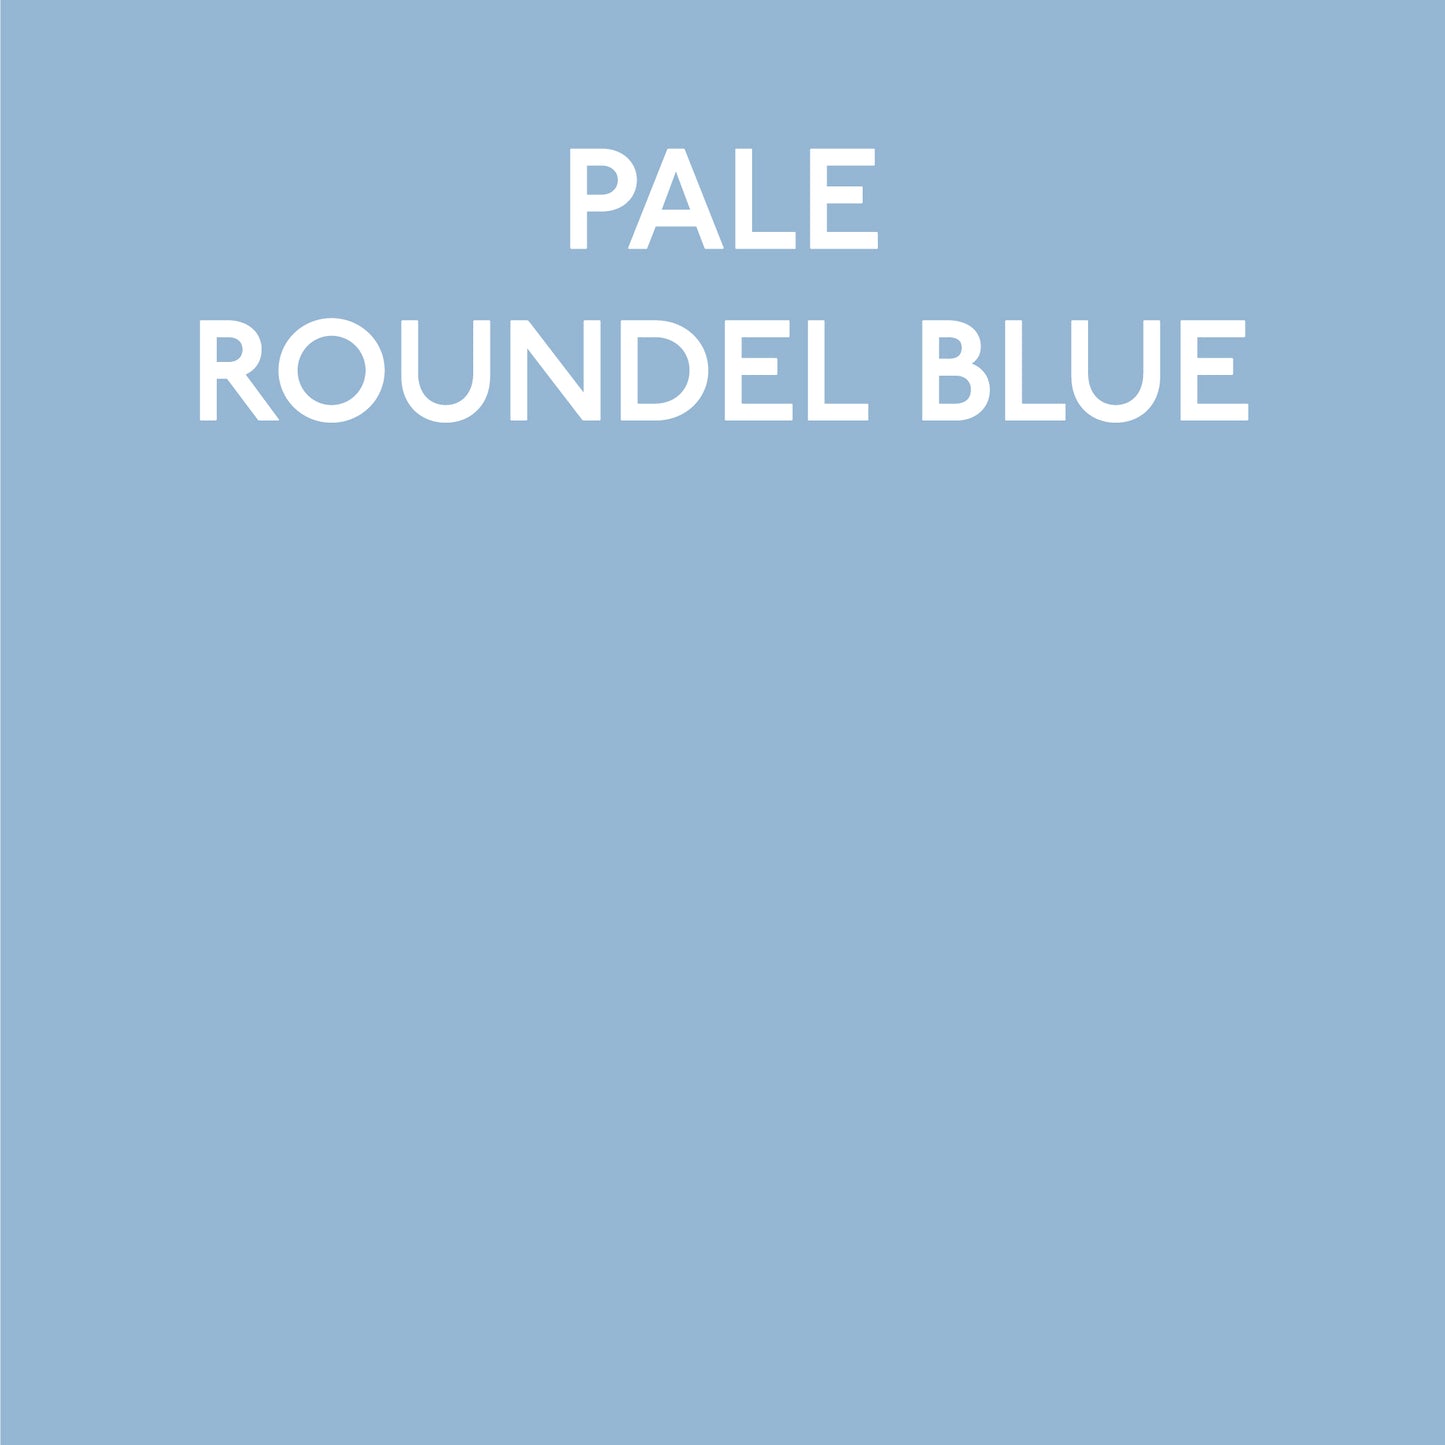 Pale Roundel Blue Swatch